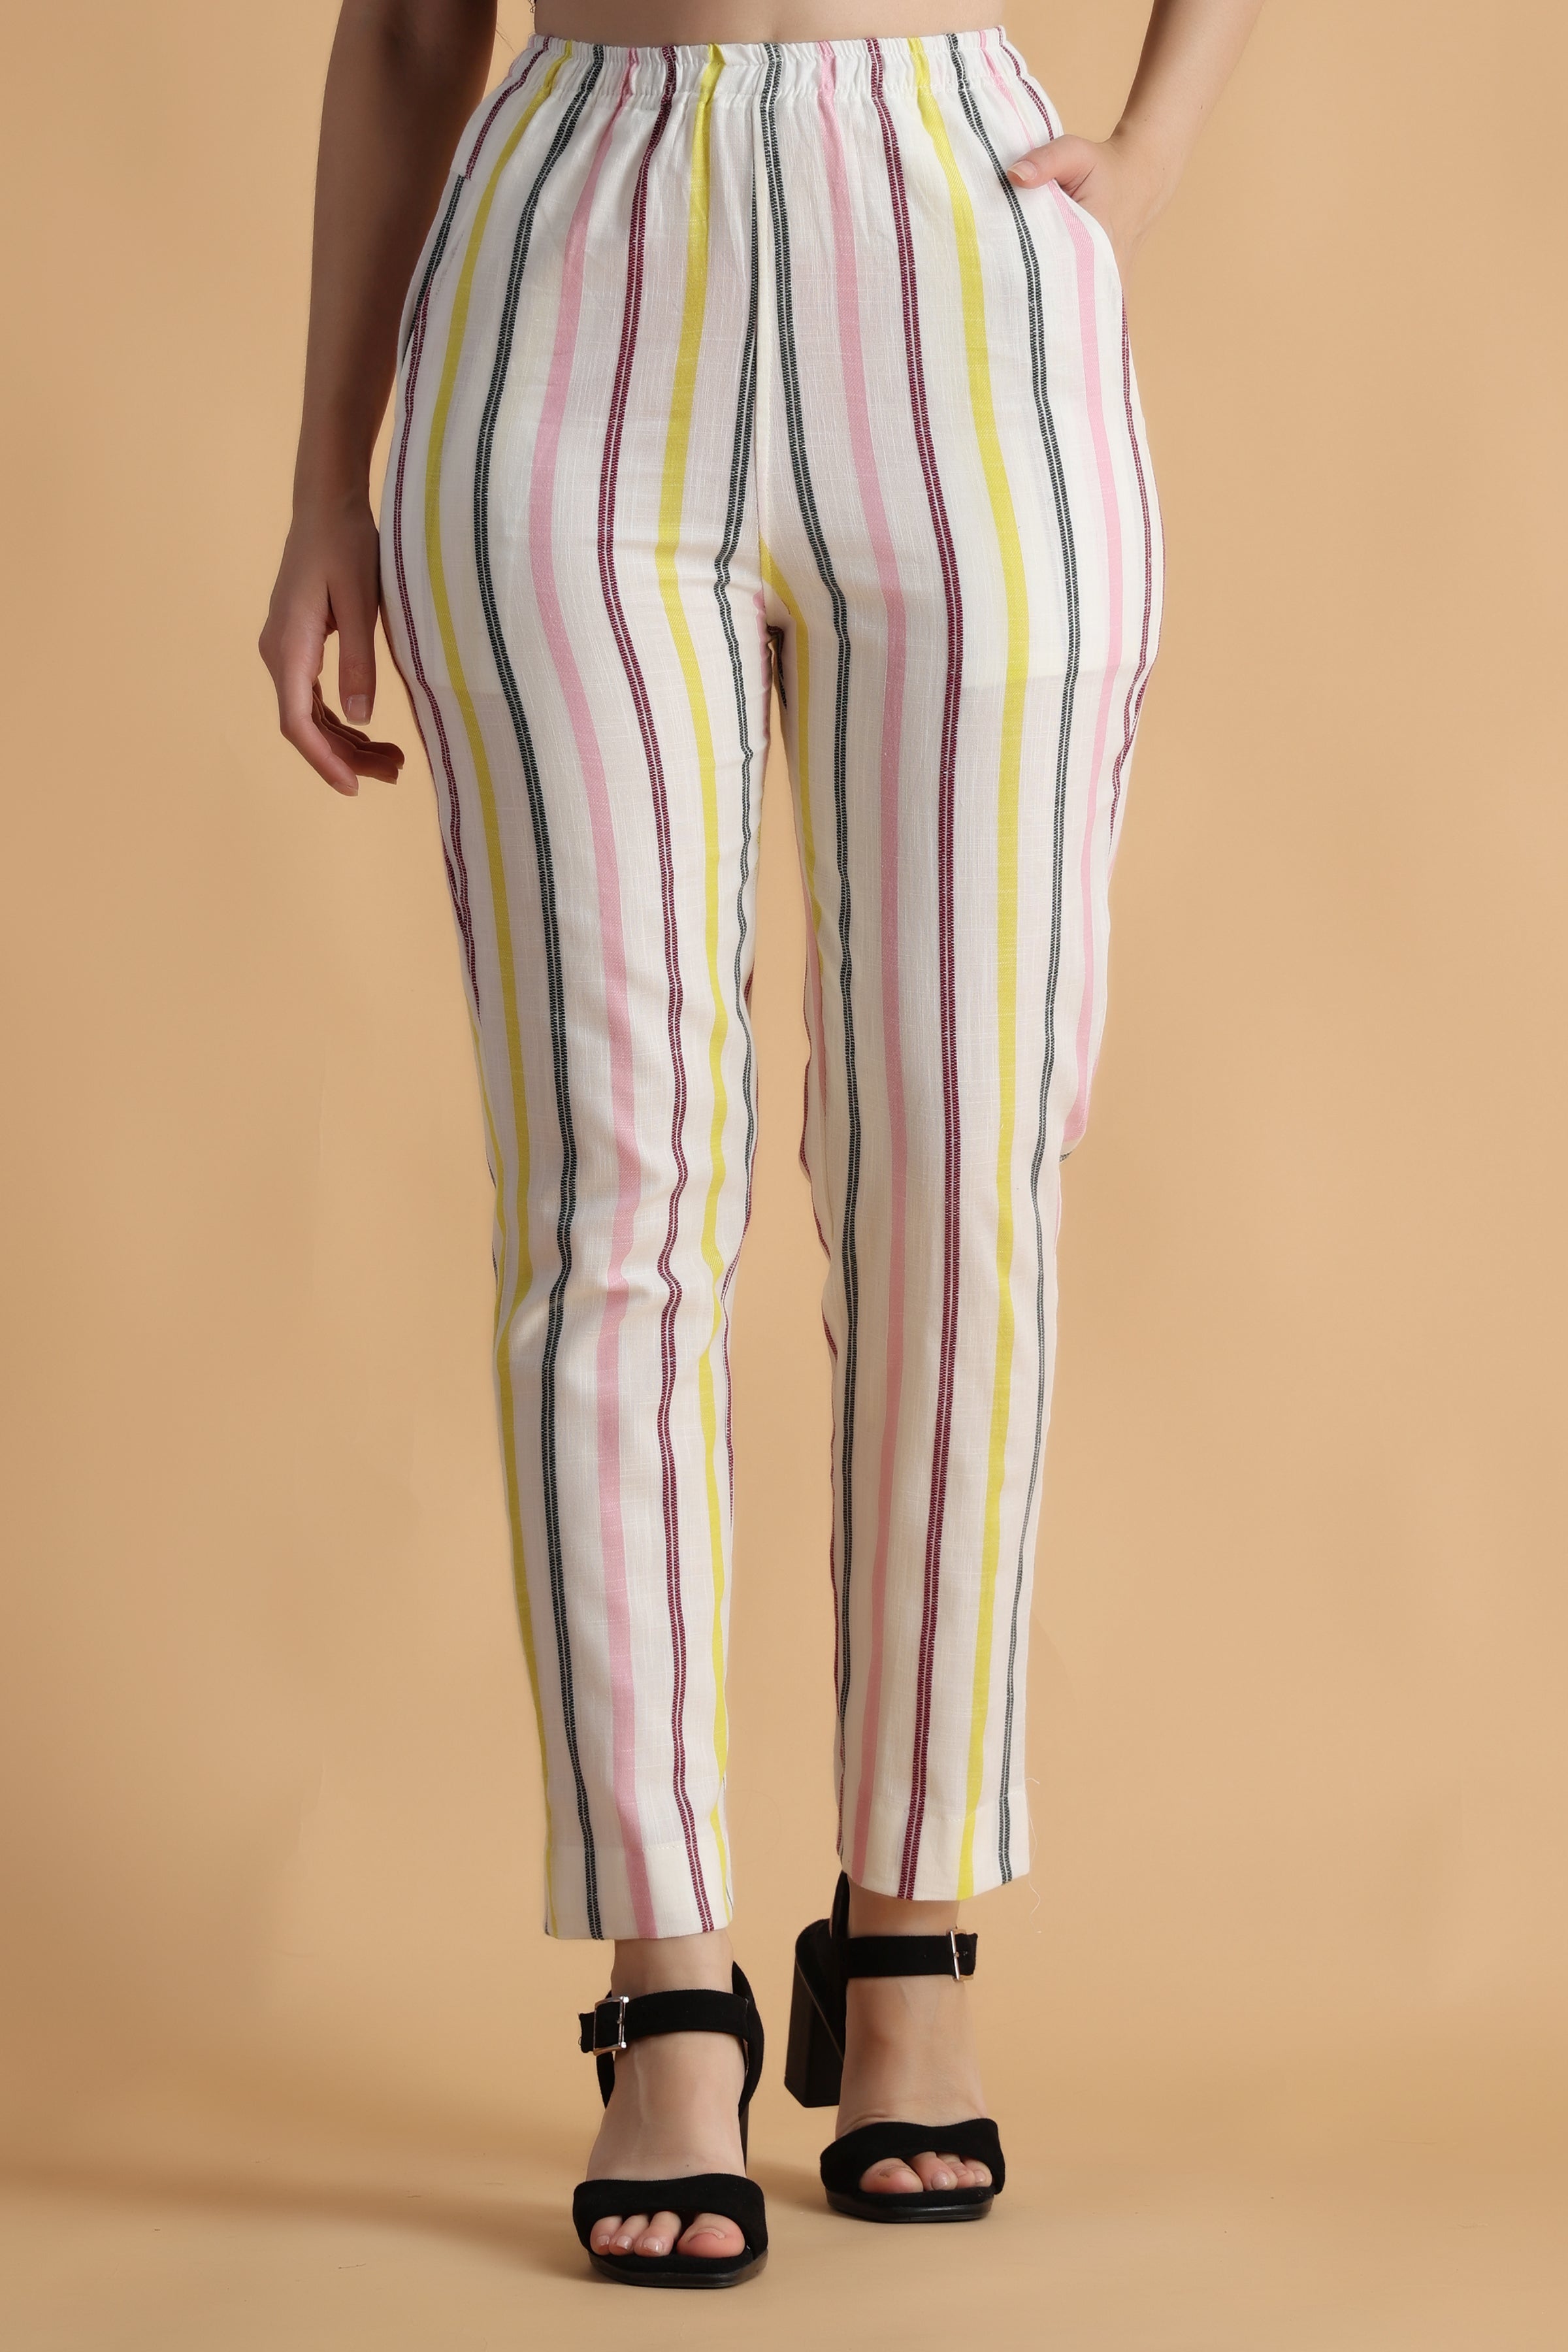 MSGM Beige High-Waist Striped Trousers for Women Online India at Darveys.com